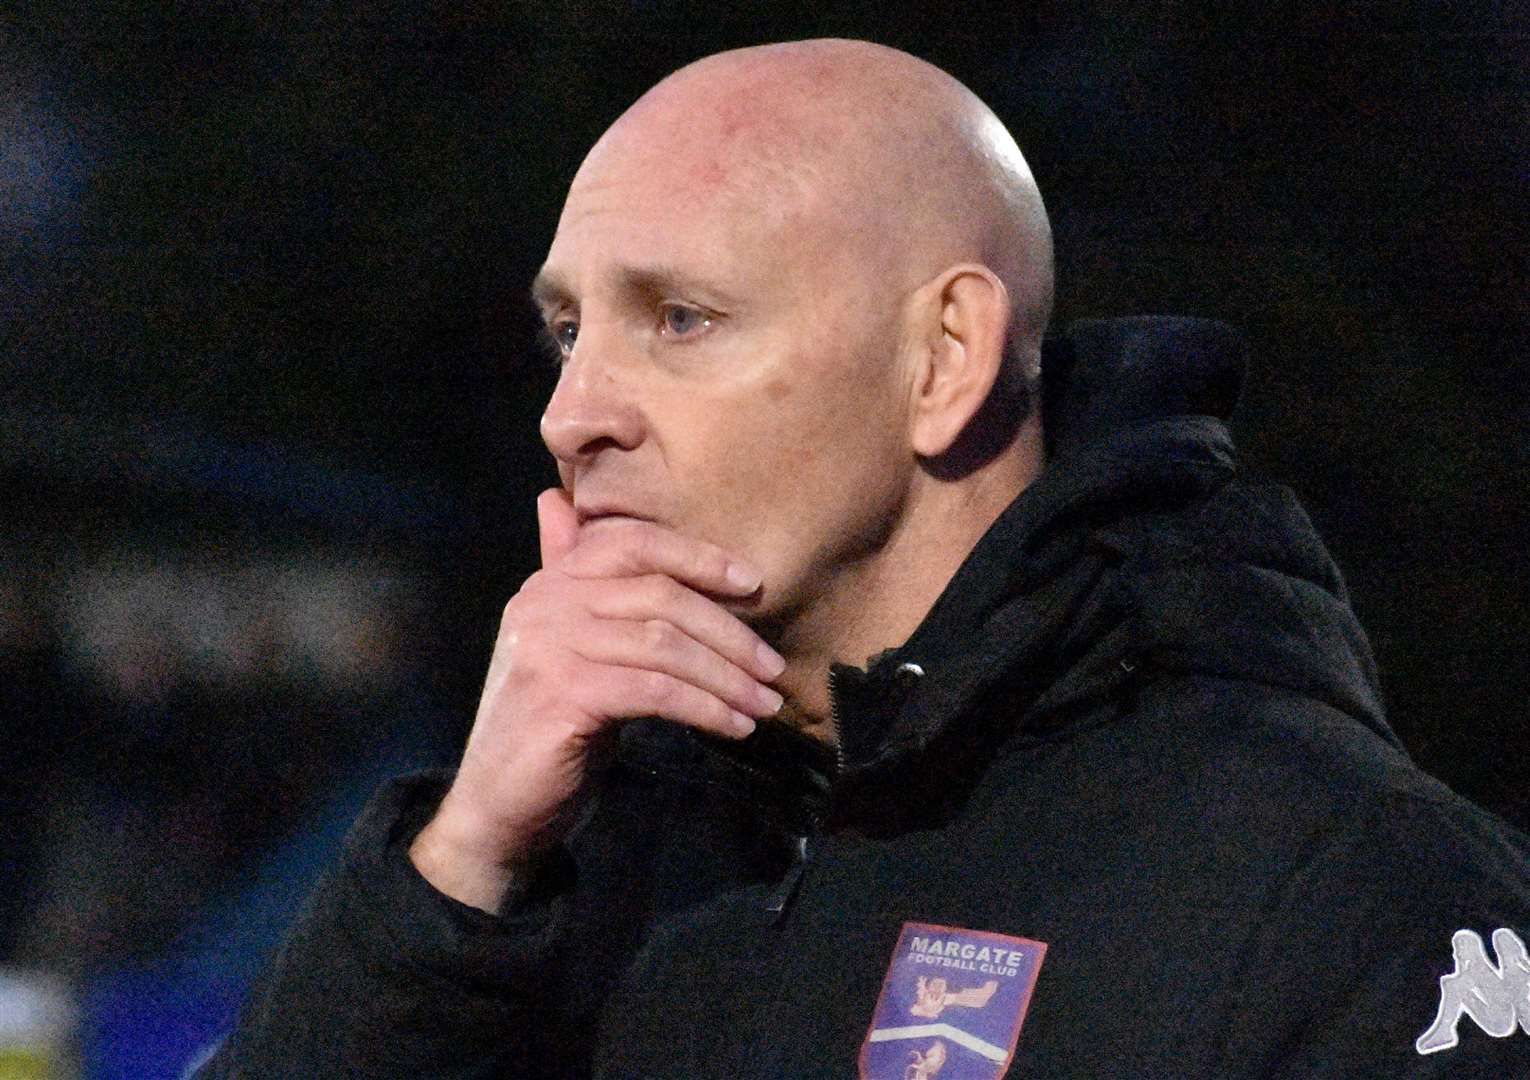 A big night ahead as Margate boss Mark Stimson hopes his team still have a fighting chance this weekend Picture: Randolph File